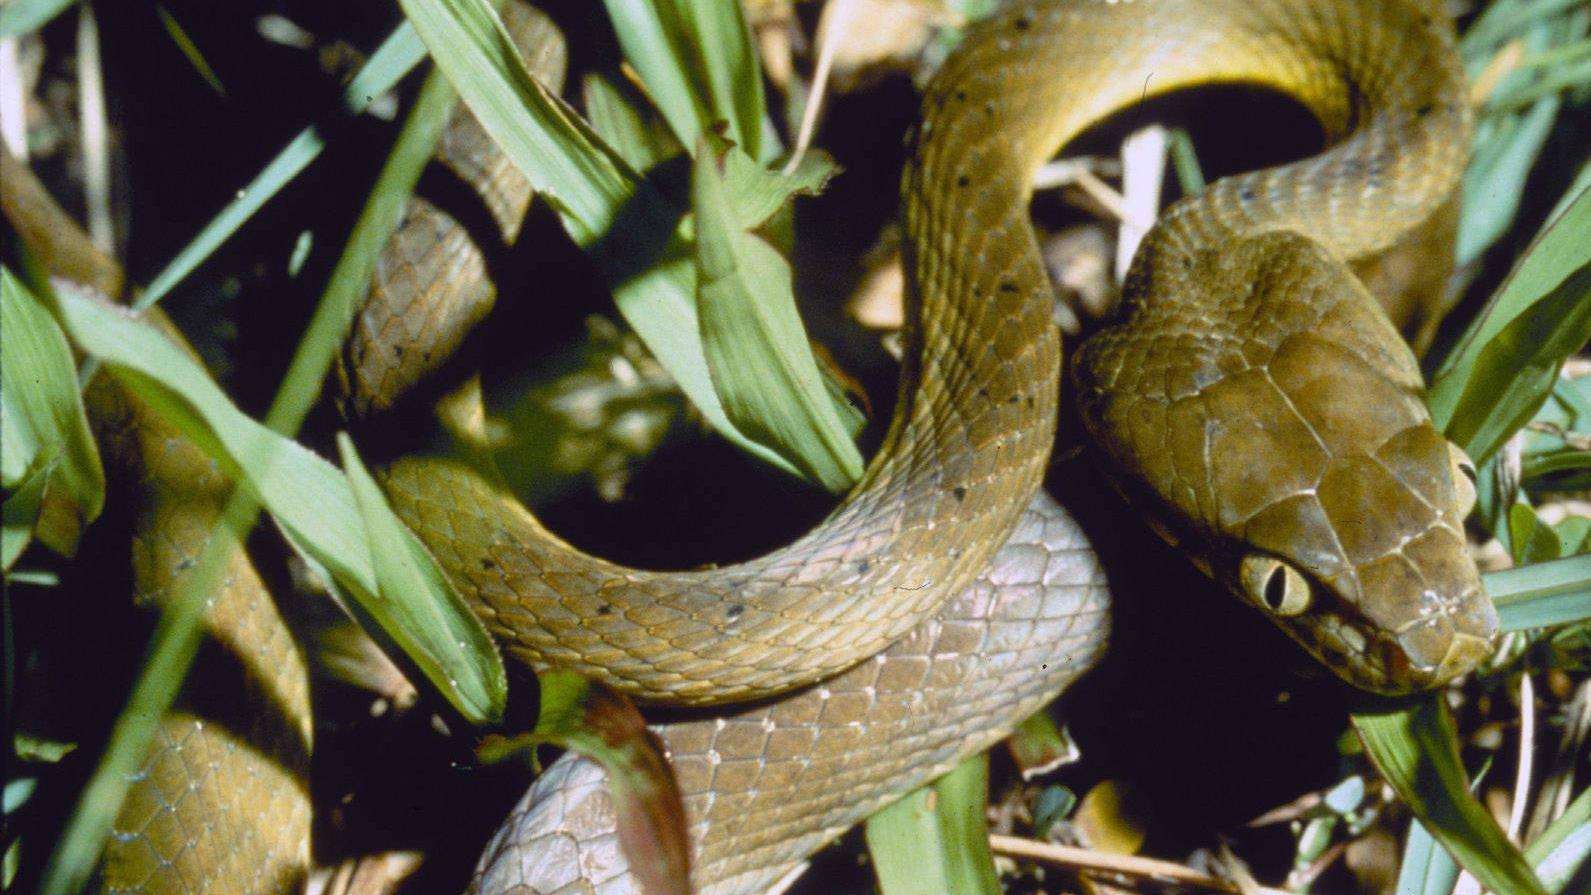 Brown tree snake in the grass